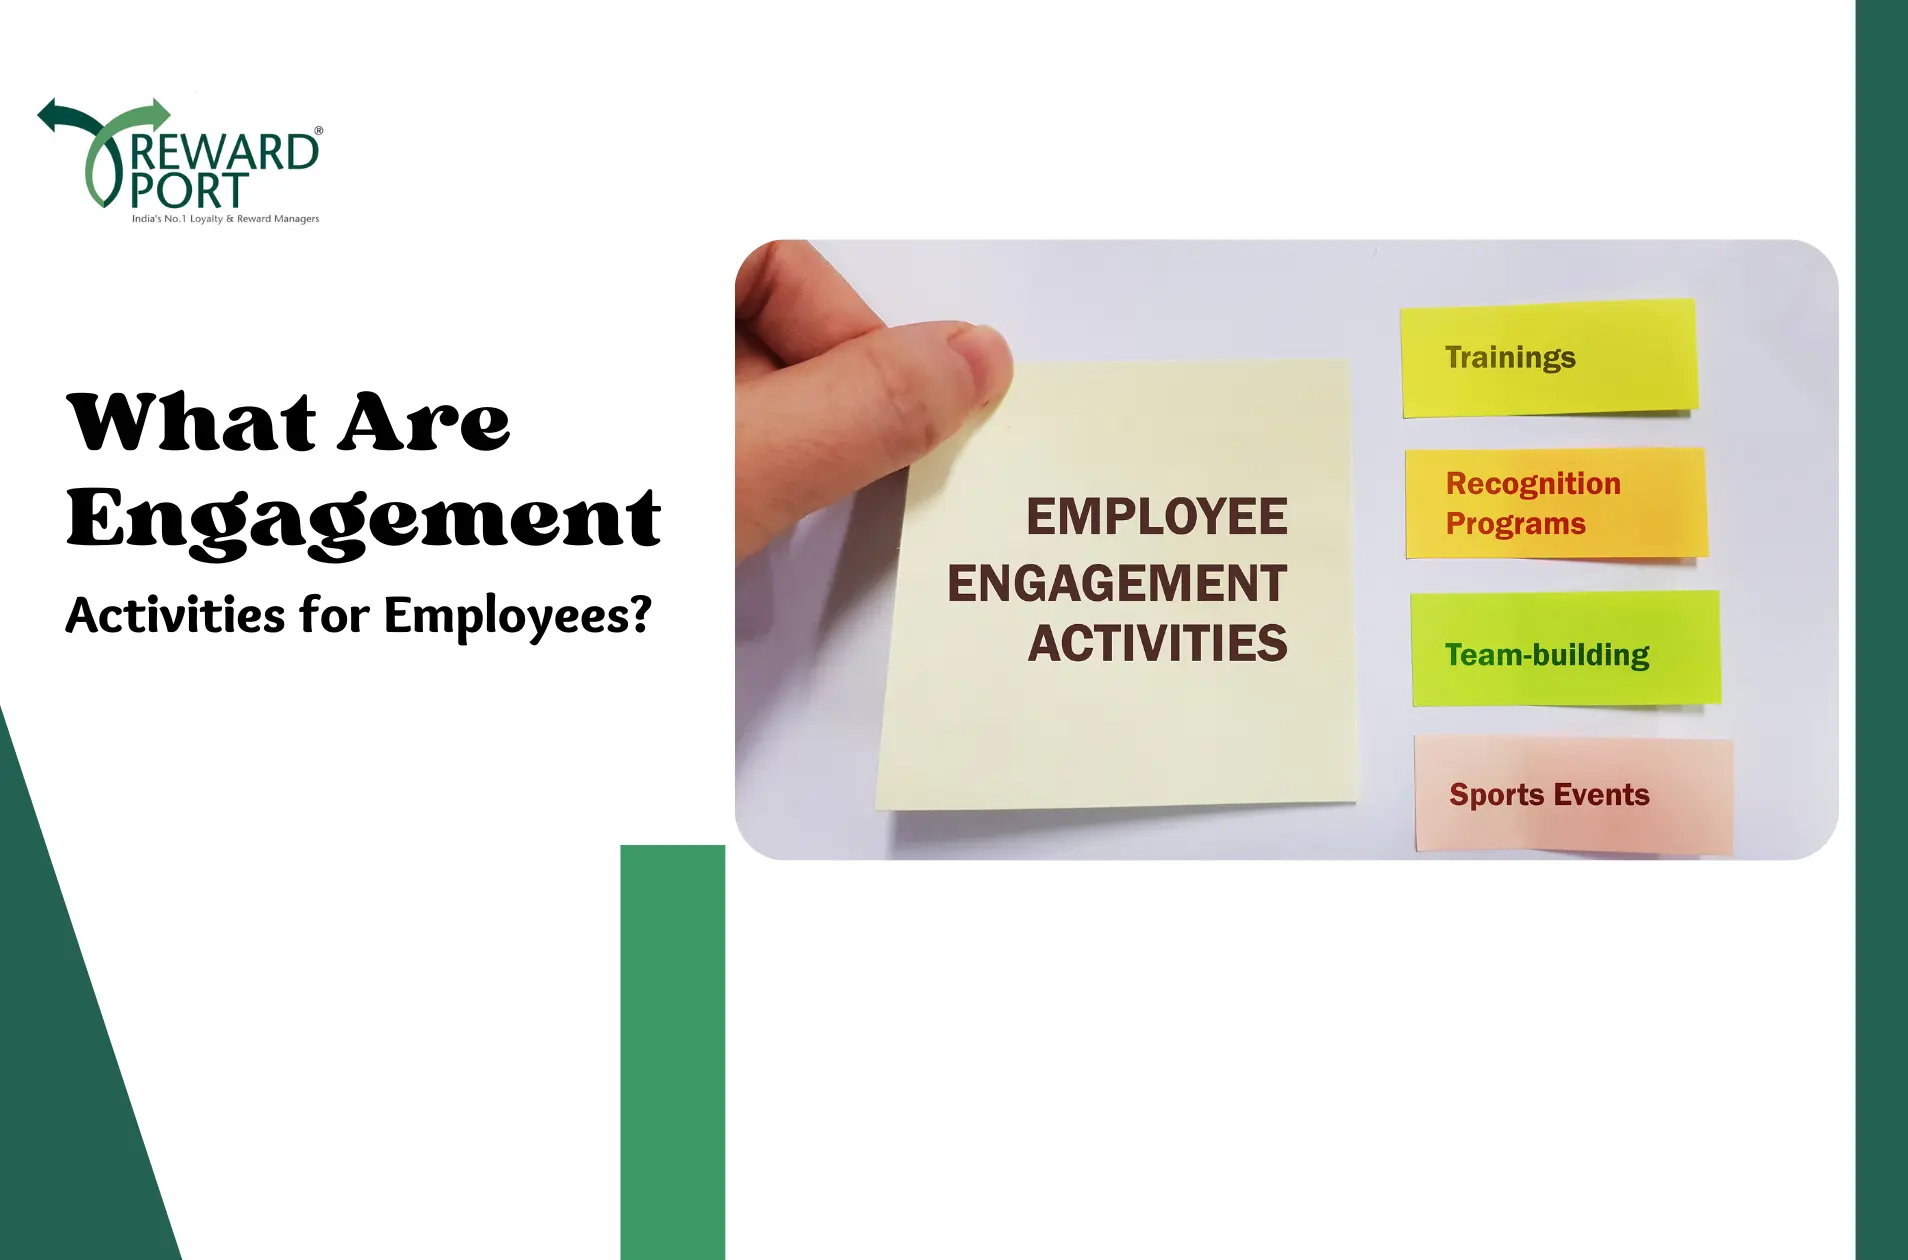 What Are Engagement Activities for Employees